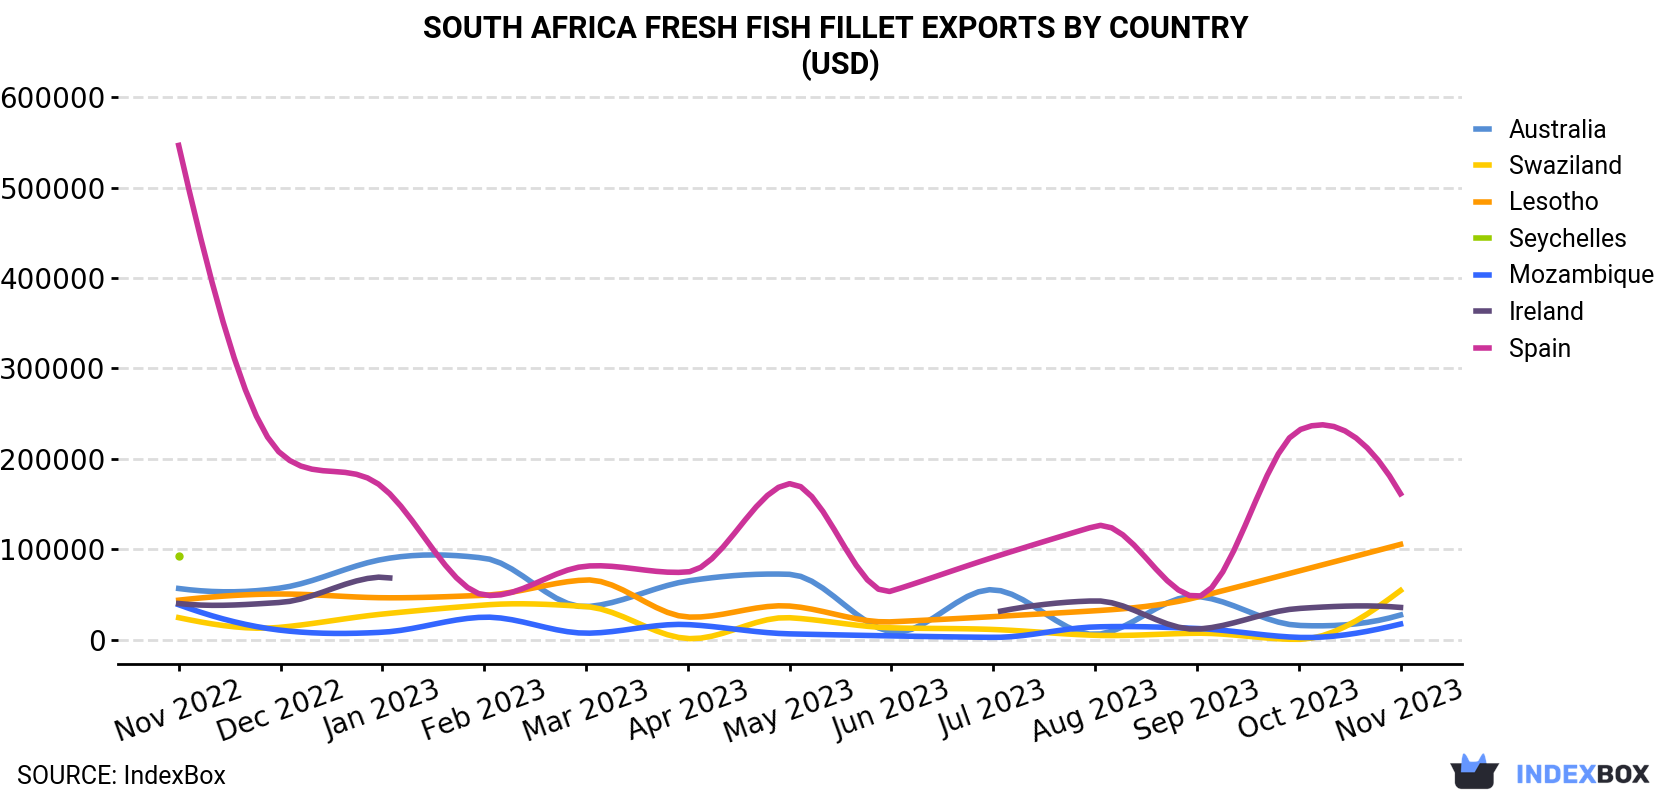 South Africa Fresh Fish Fillet Exports By Country (USD)